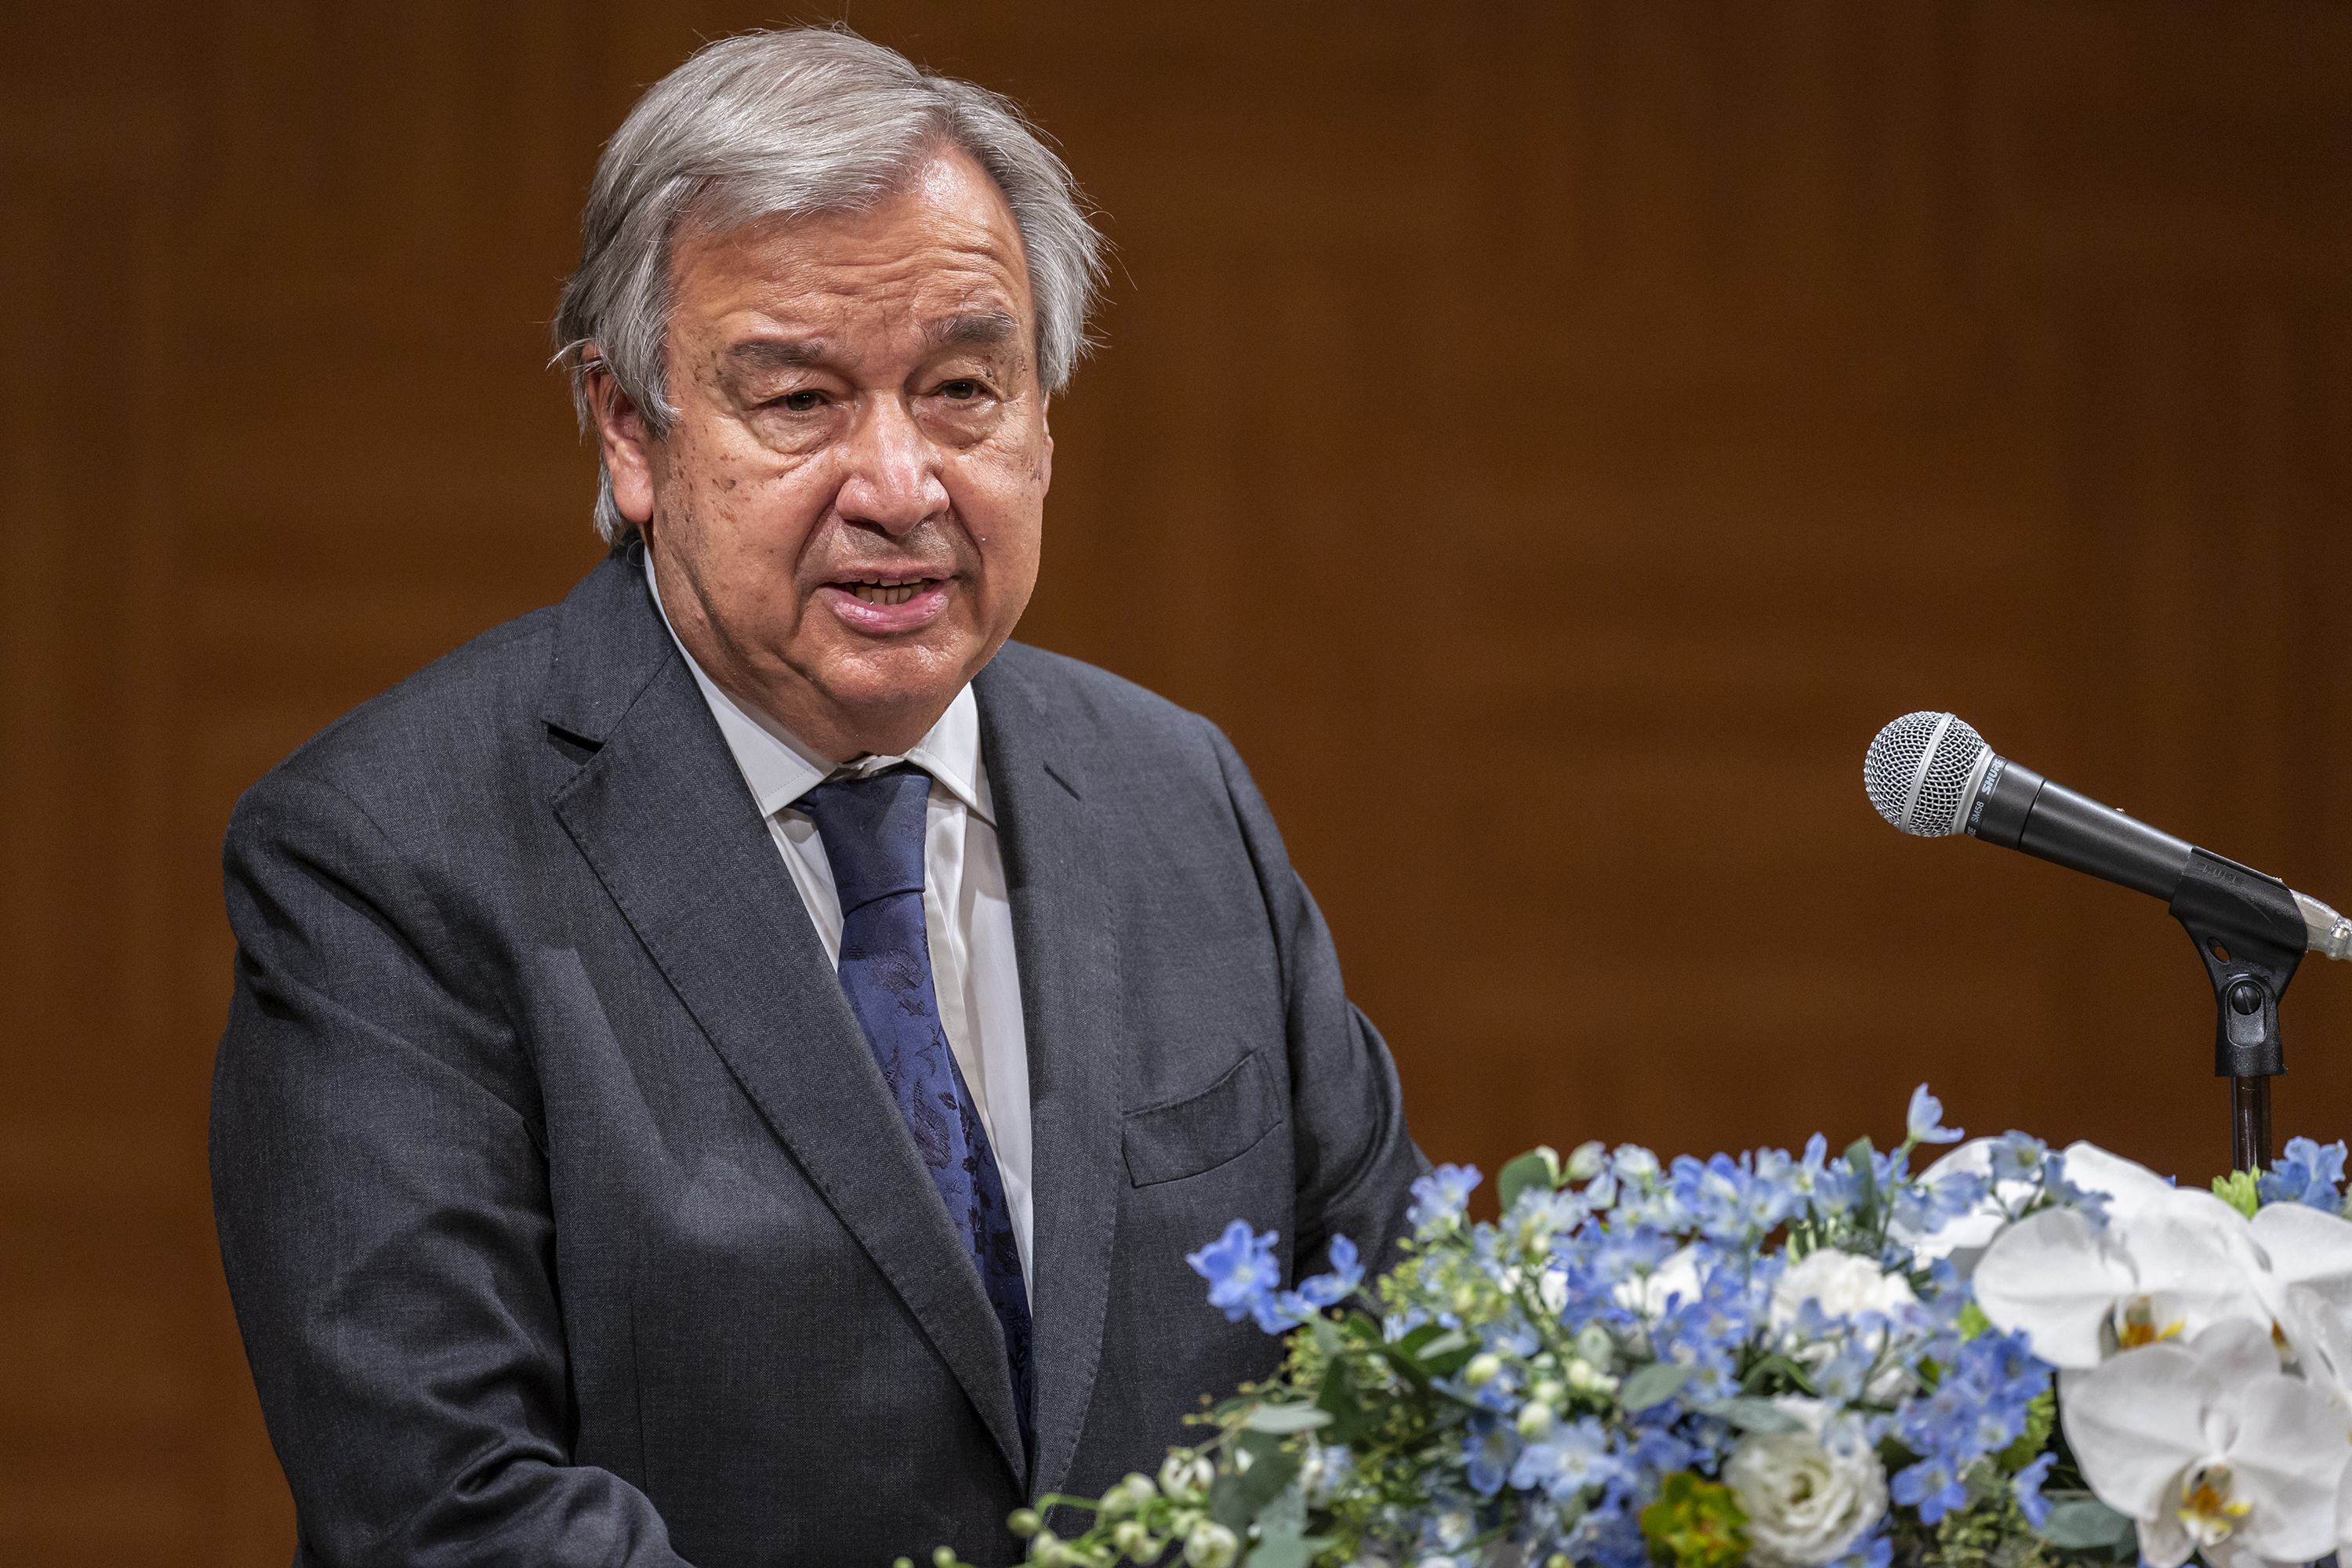 United Nations Secretary General Antonio Guterres speaks during a press conference on August 6 in Hiroshima, Japan.